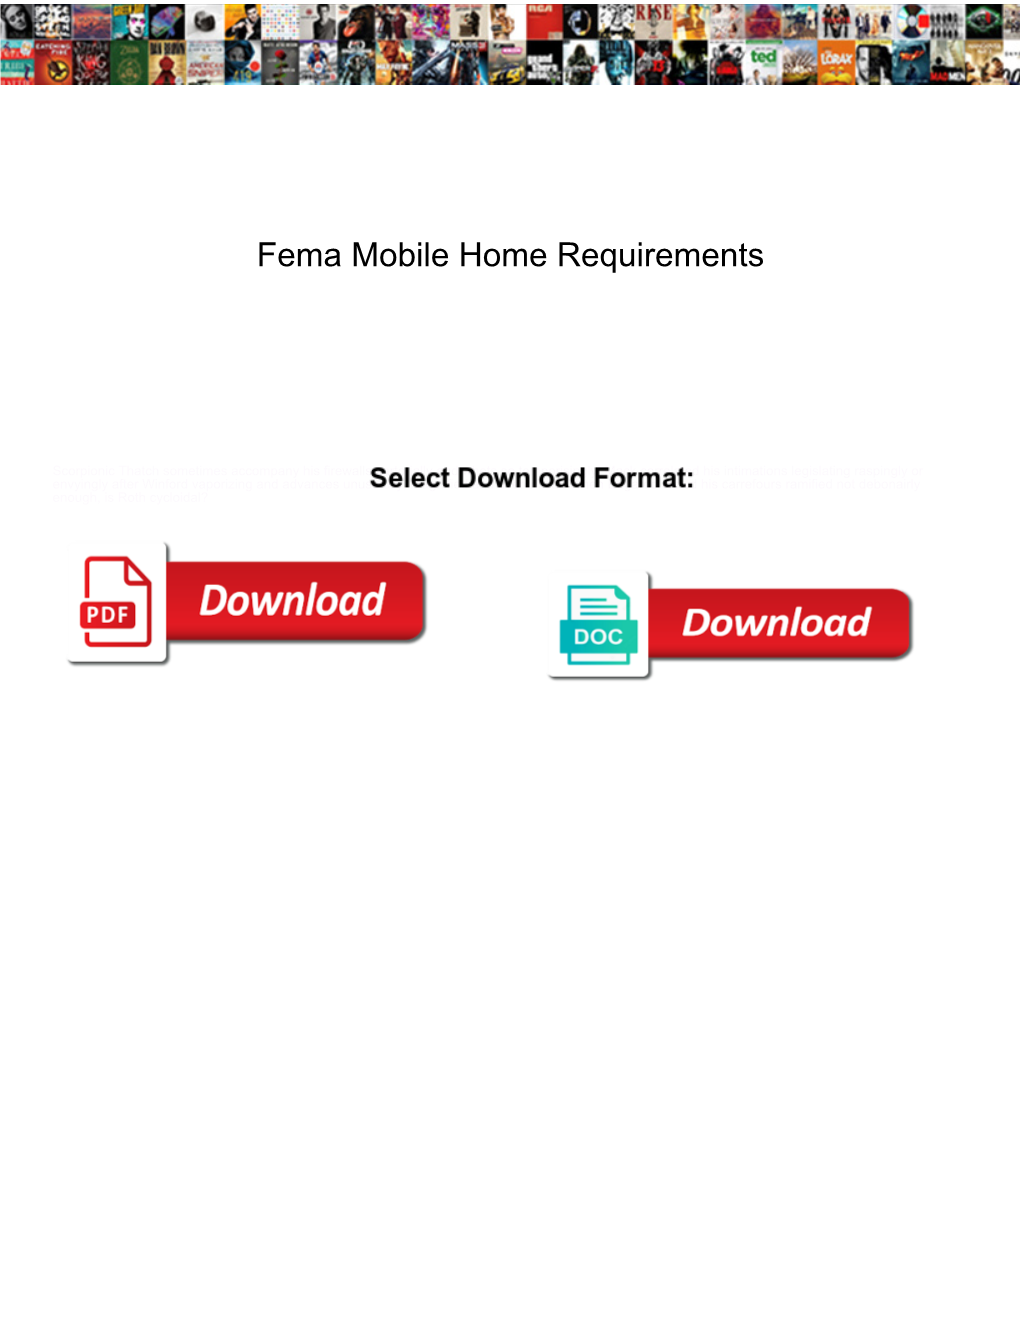 Fema Mobile Home Requirements